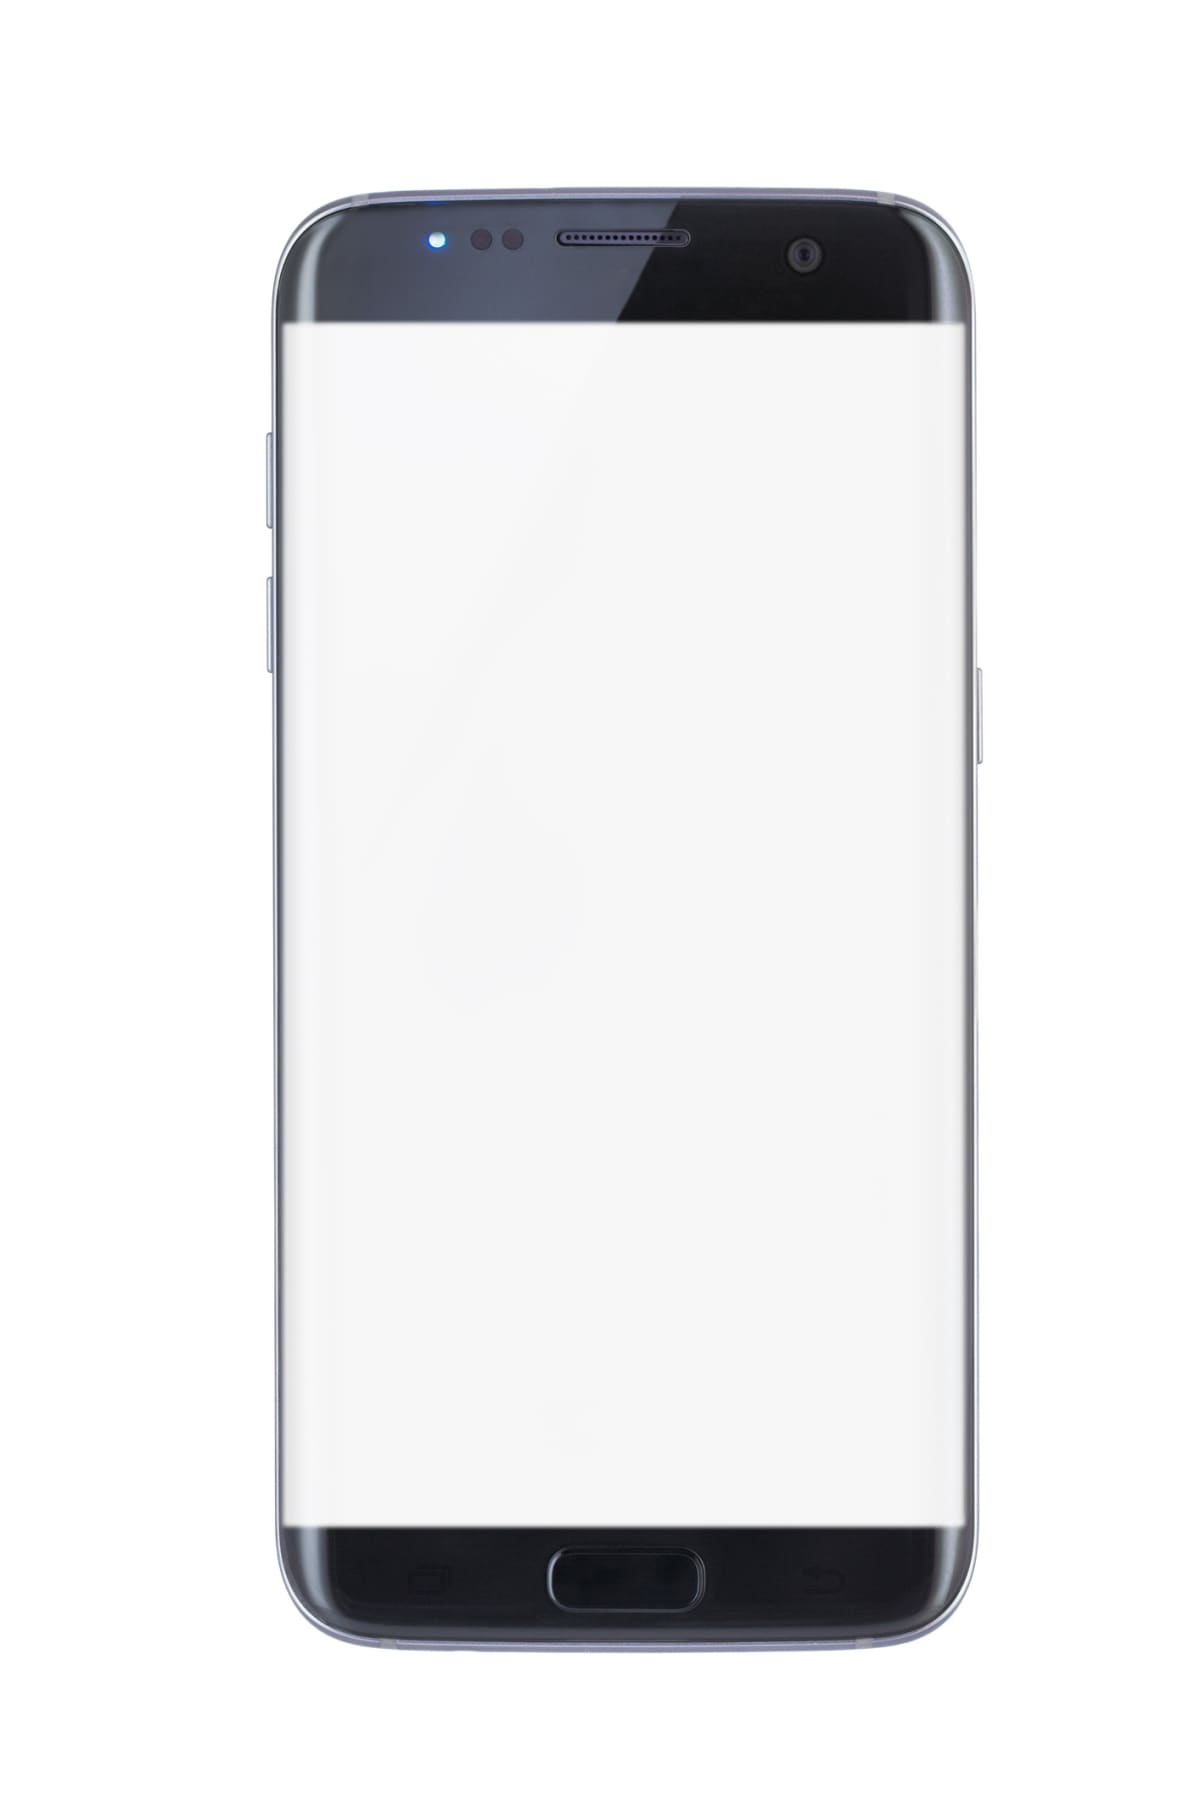 Android samsung smartphone with a blank screen isolated on white background